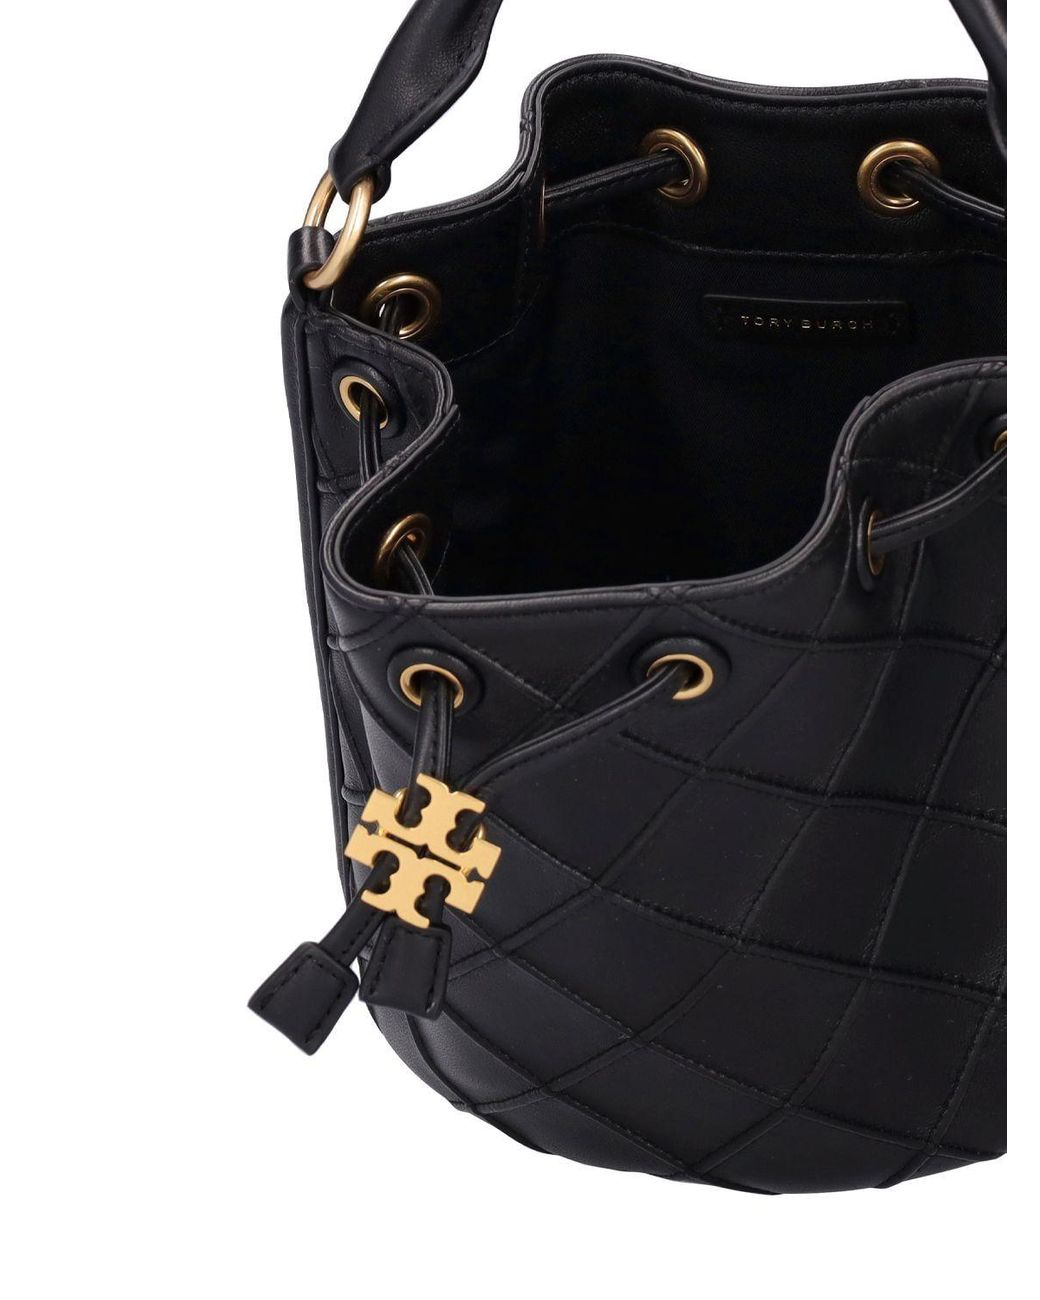 Tory Burch Fleming Soft Leather Bucket Bag in Black